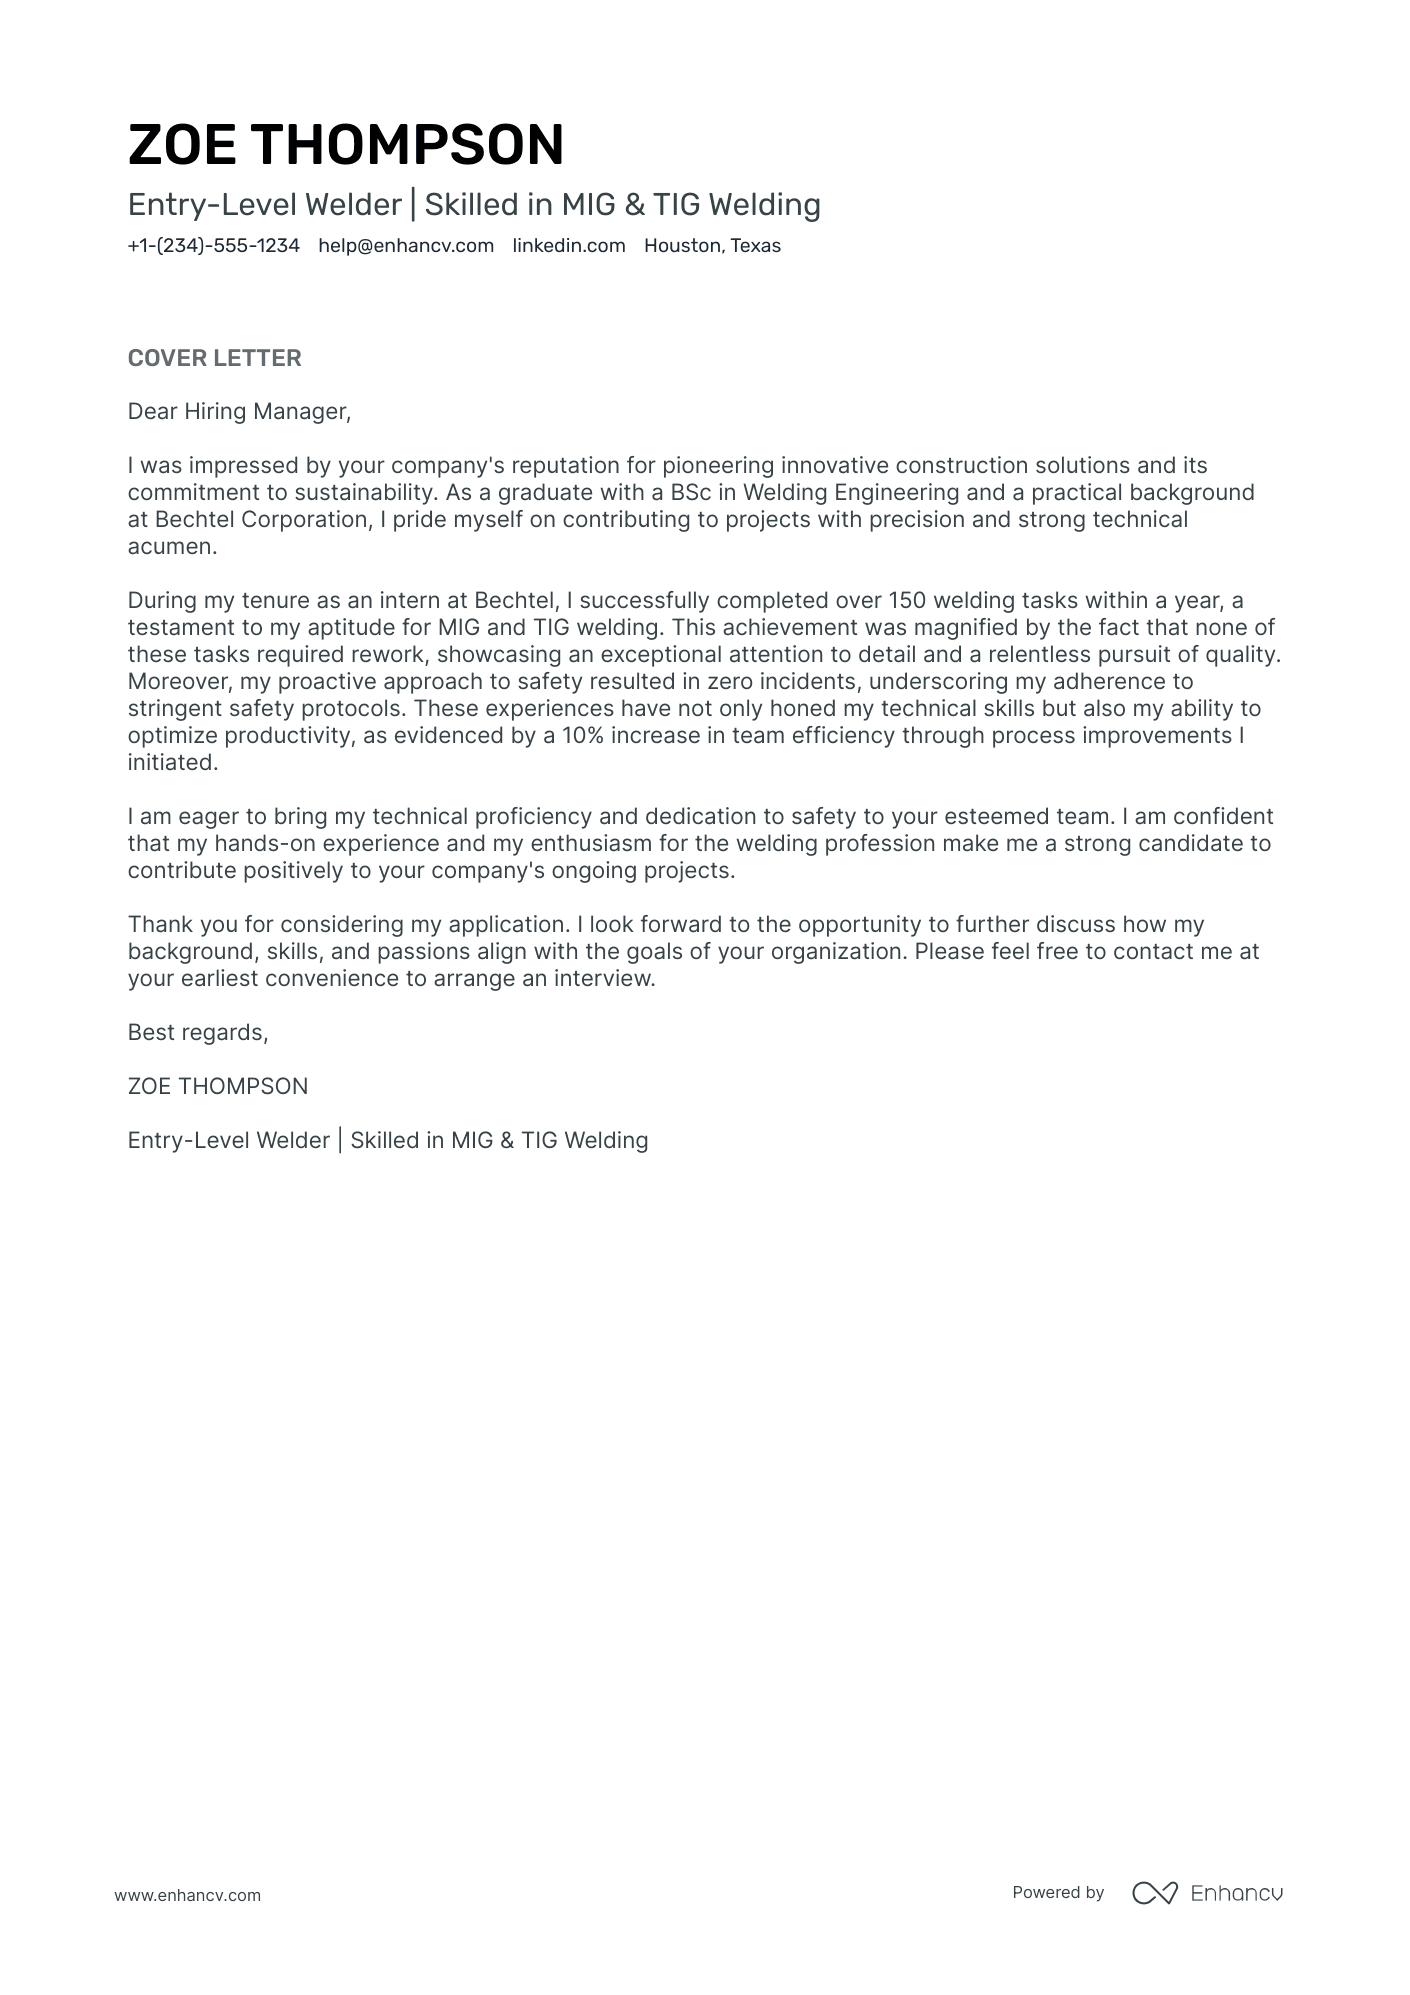 application letter for welder position no experience